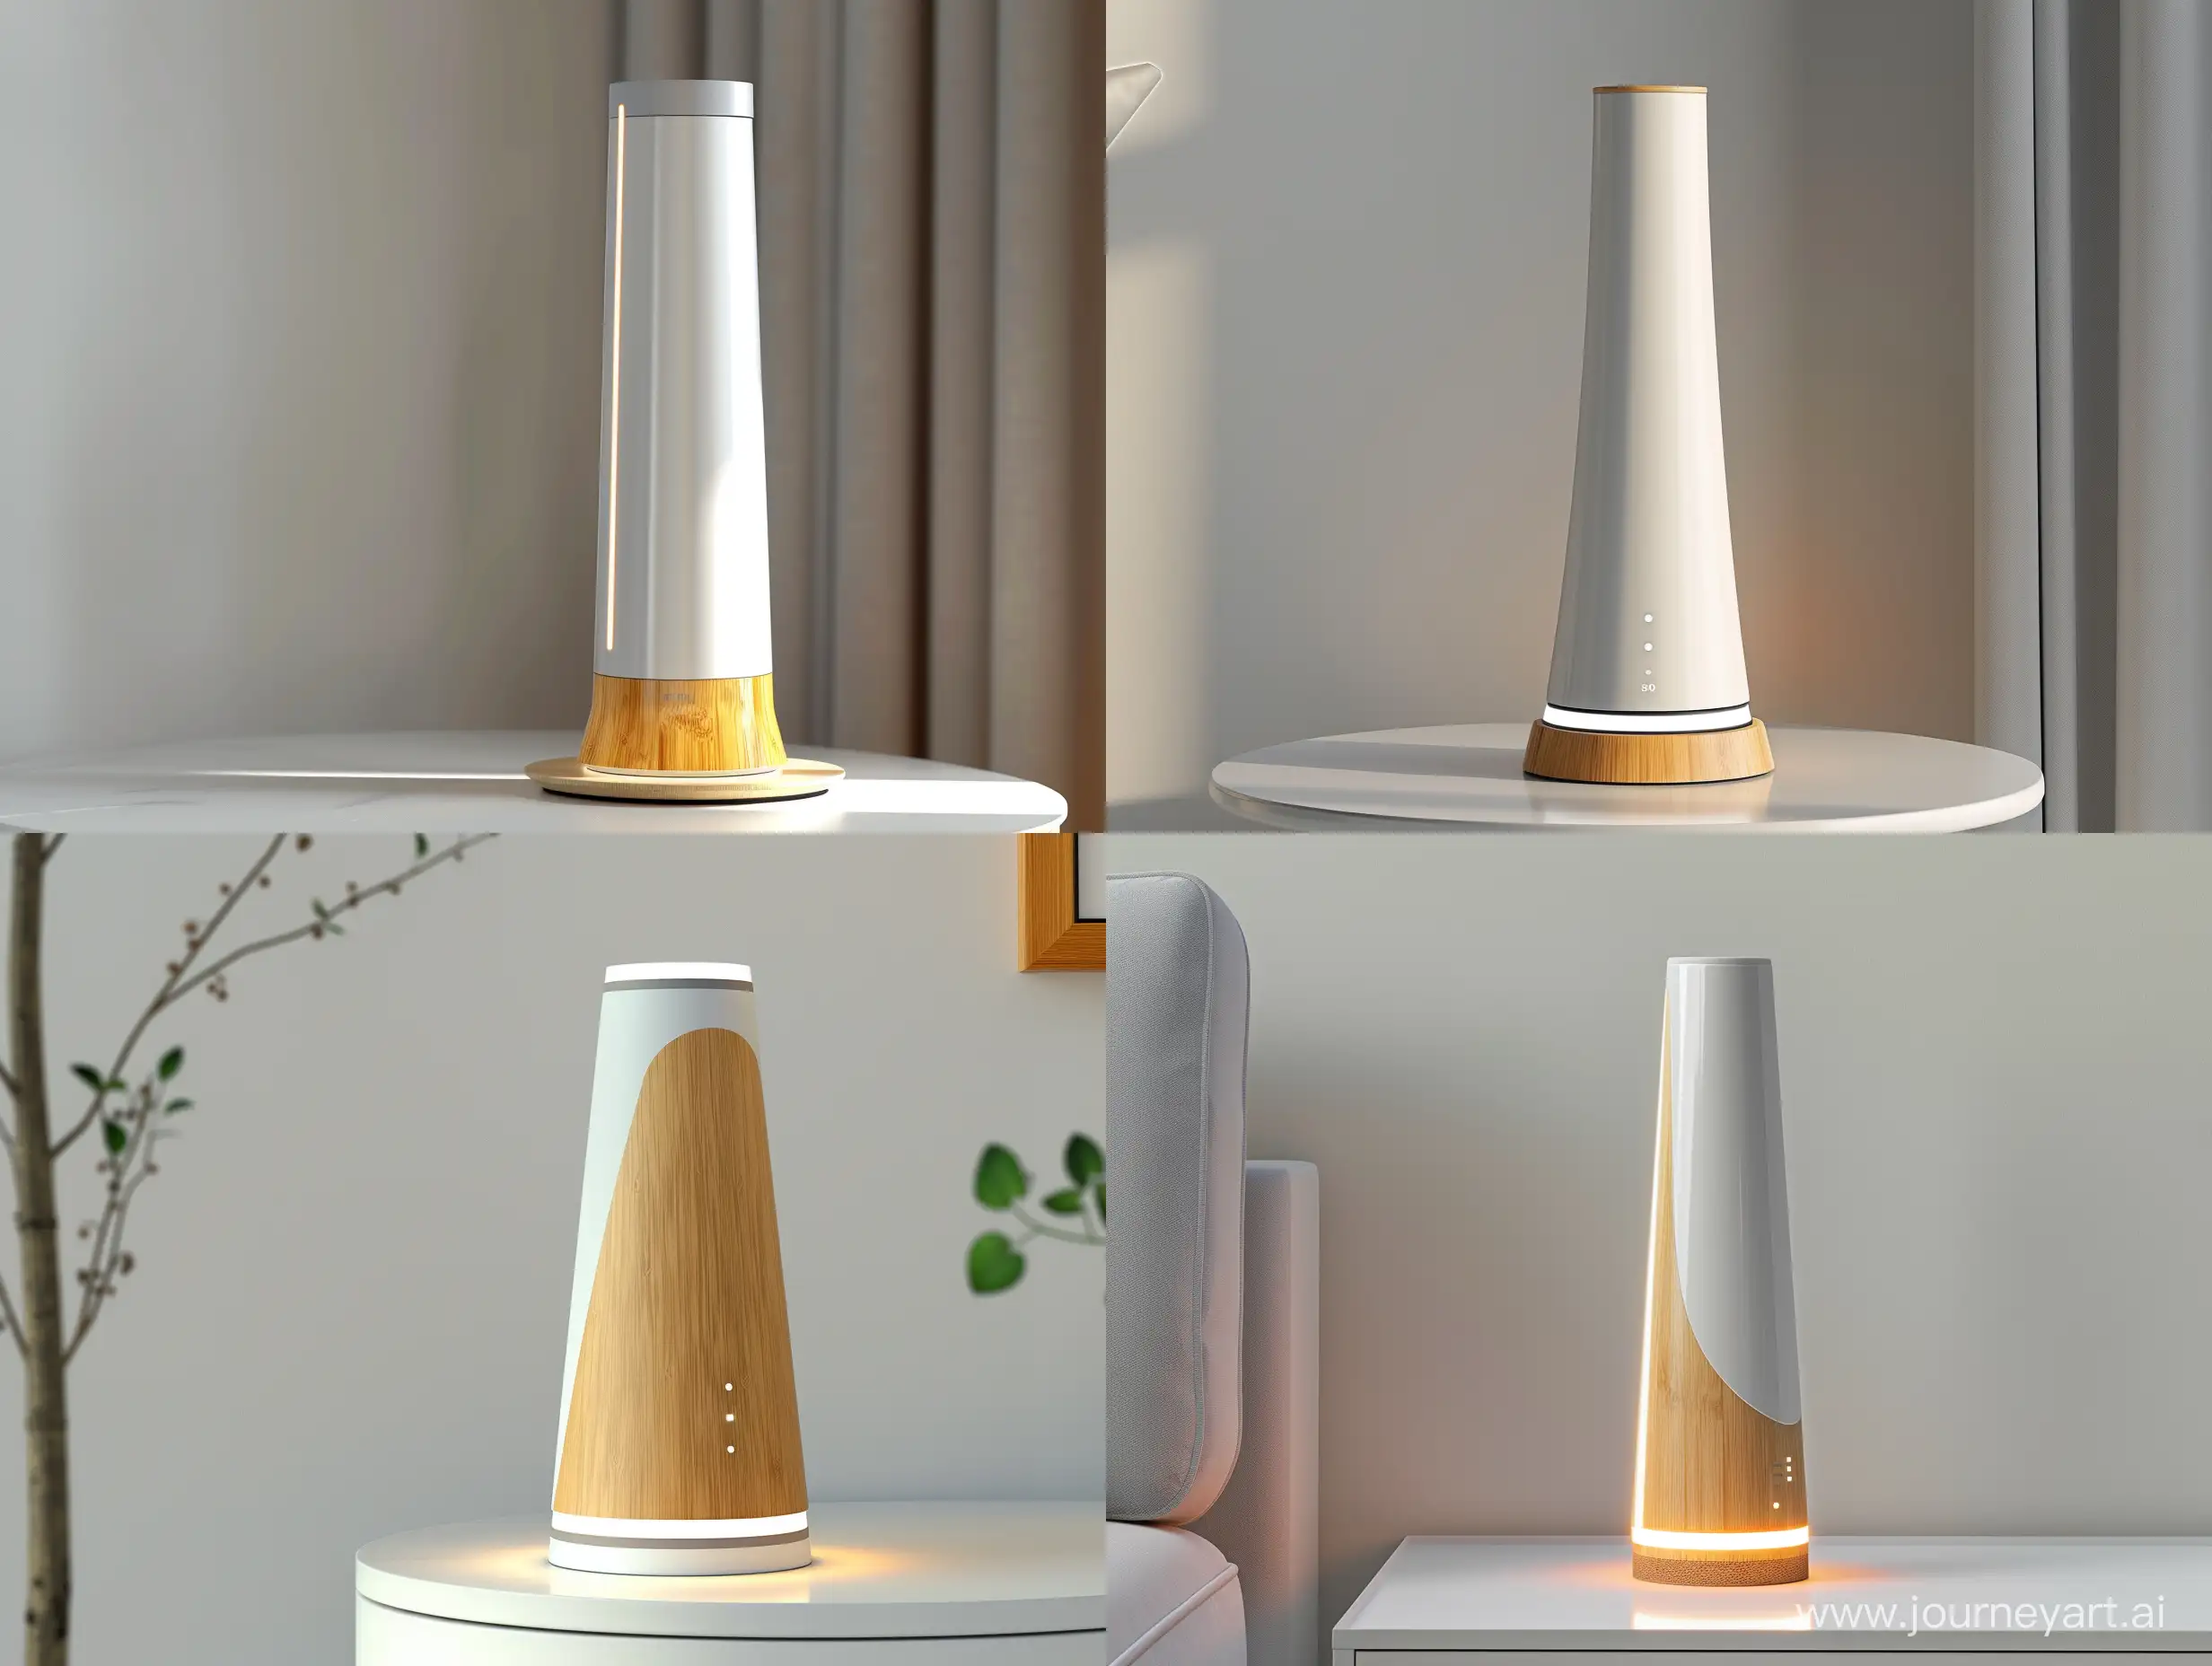 Visualize the Zenith Energy Gateway as a pinnacle of smart home energy management, blending modern design with environmental consciousness. This device embodies minimalism with its sleek, vertical silhouette, slightly tapered at the top for a subtle dynamic edge. Standing 30 cm tall with an 8 cm base diameter, its base is crafted from sustainable bamboo, offering a warm, natural aesthetic that speaks to eco-friendliness. The body, made from recycled plastics, shines in a pristine white or soft light gray, designed to complement any smart home decor with its understated elegance.
The Zenith Energy Gateway features discreet, soft LED lighting at its base and edges, providing ambient illumination and notifications in a sophisticated manner. This lighting enhances the device's futuristic appeal, creating a visual connection between the device and its smart home environment.
Designed to be both a functional energy management hub and a statement piece of technology, the Gateway stands on a minimalist side table or is mounted on a clean, white wall, integrating seamlessly into the smart home aesthetic. Its form factor and material choice symbolize a commitment to sustainability, innovation, and design excellence, aiming to resonate with modern homeowners who prioritize eco-conscious living without compromising on style.
The image should capture the essence of the Zenith Energy Gateway in a contemporary setting, highlighting its role as an elegant, technologically advanced, and environmentally friendly addition to the smart home.realistic style